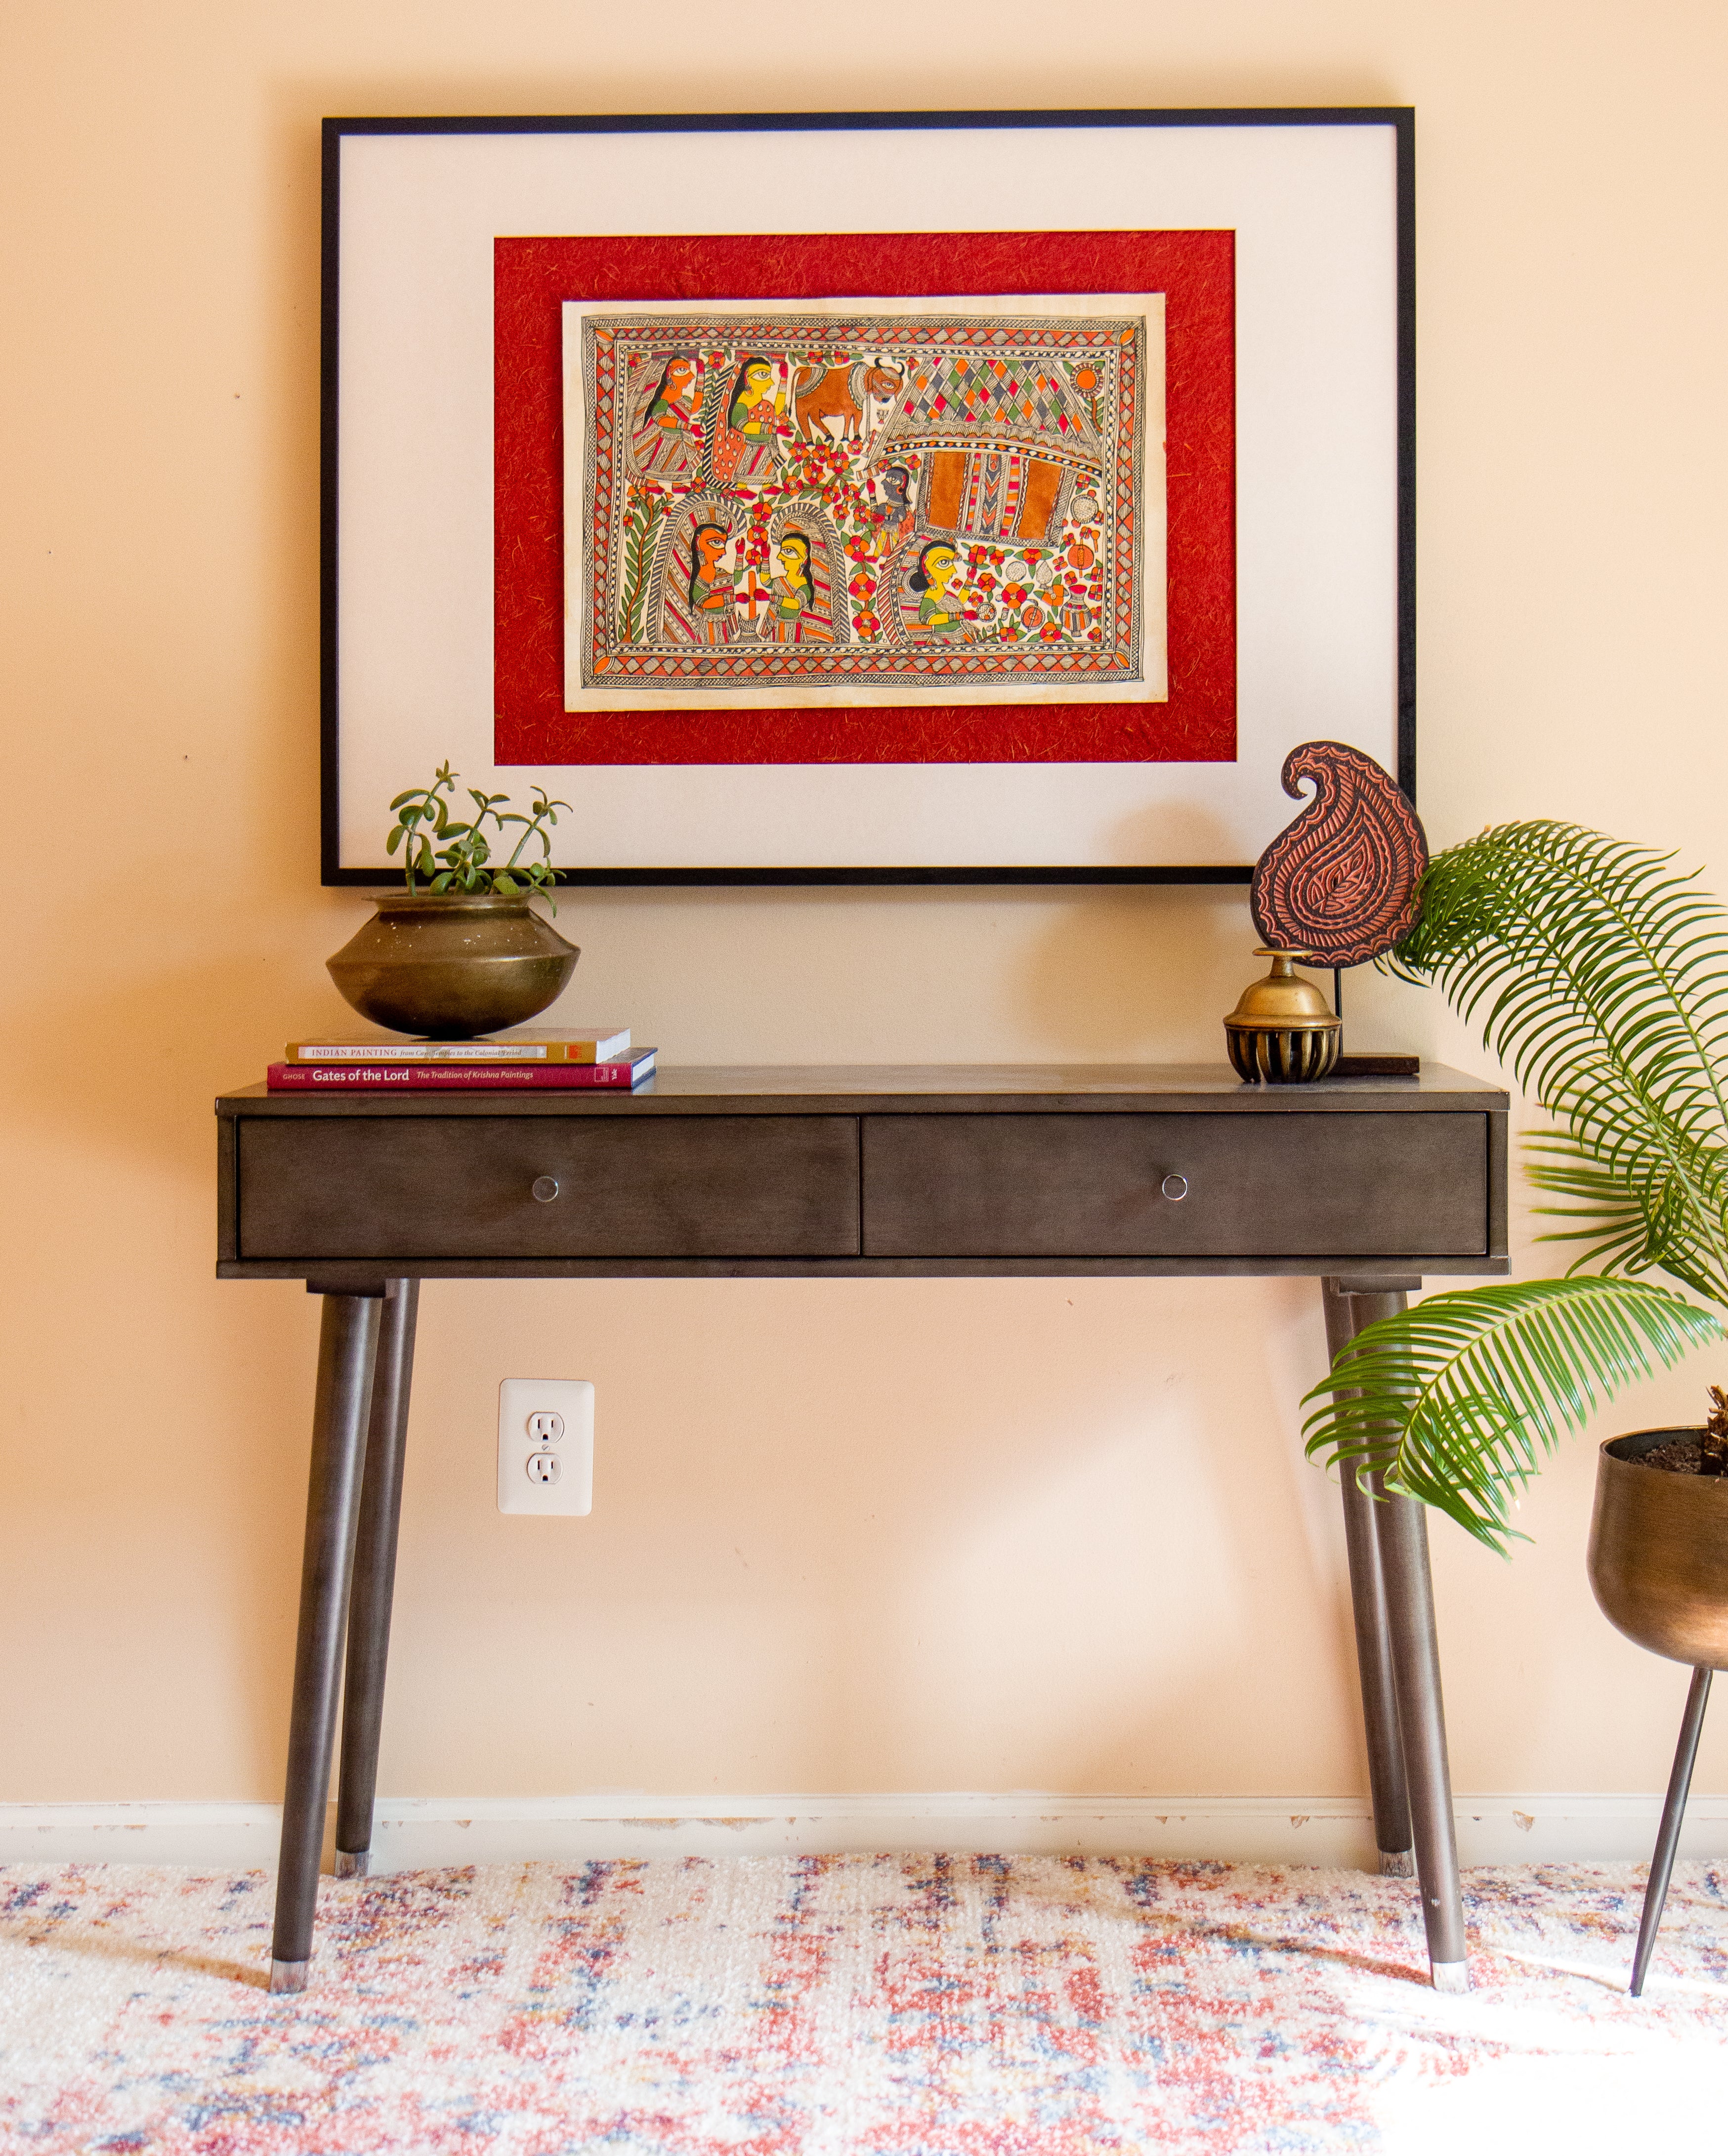 6 Ways to Incorporate South Asian Elements into your Home